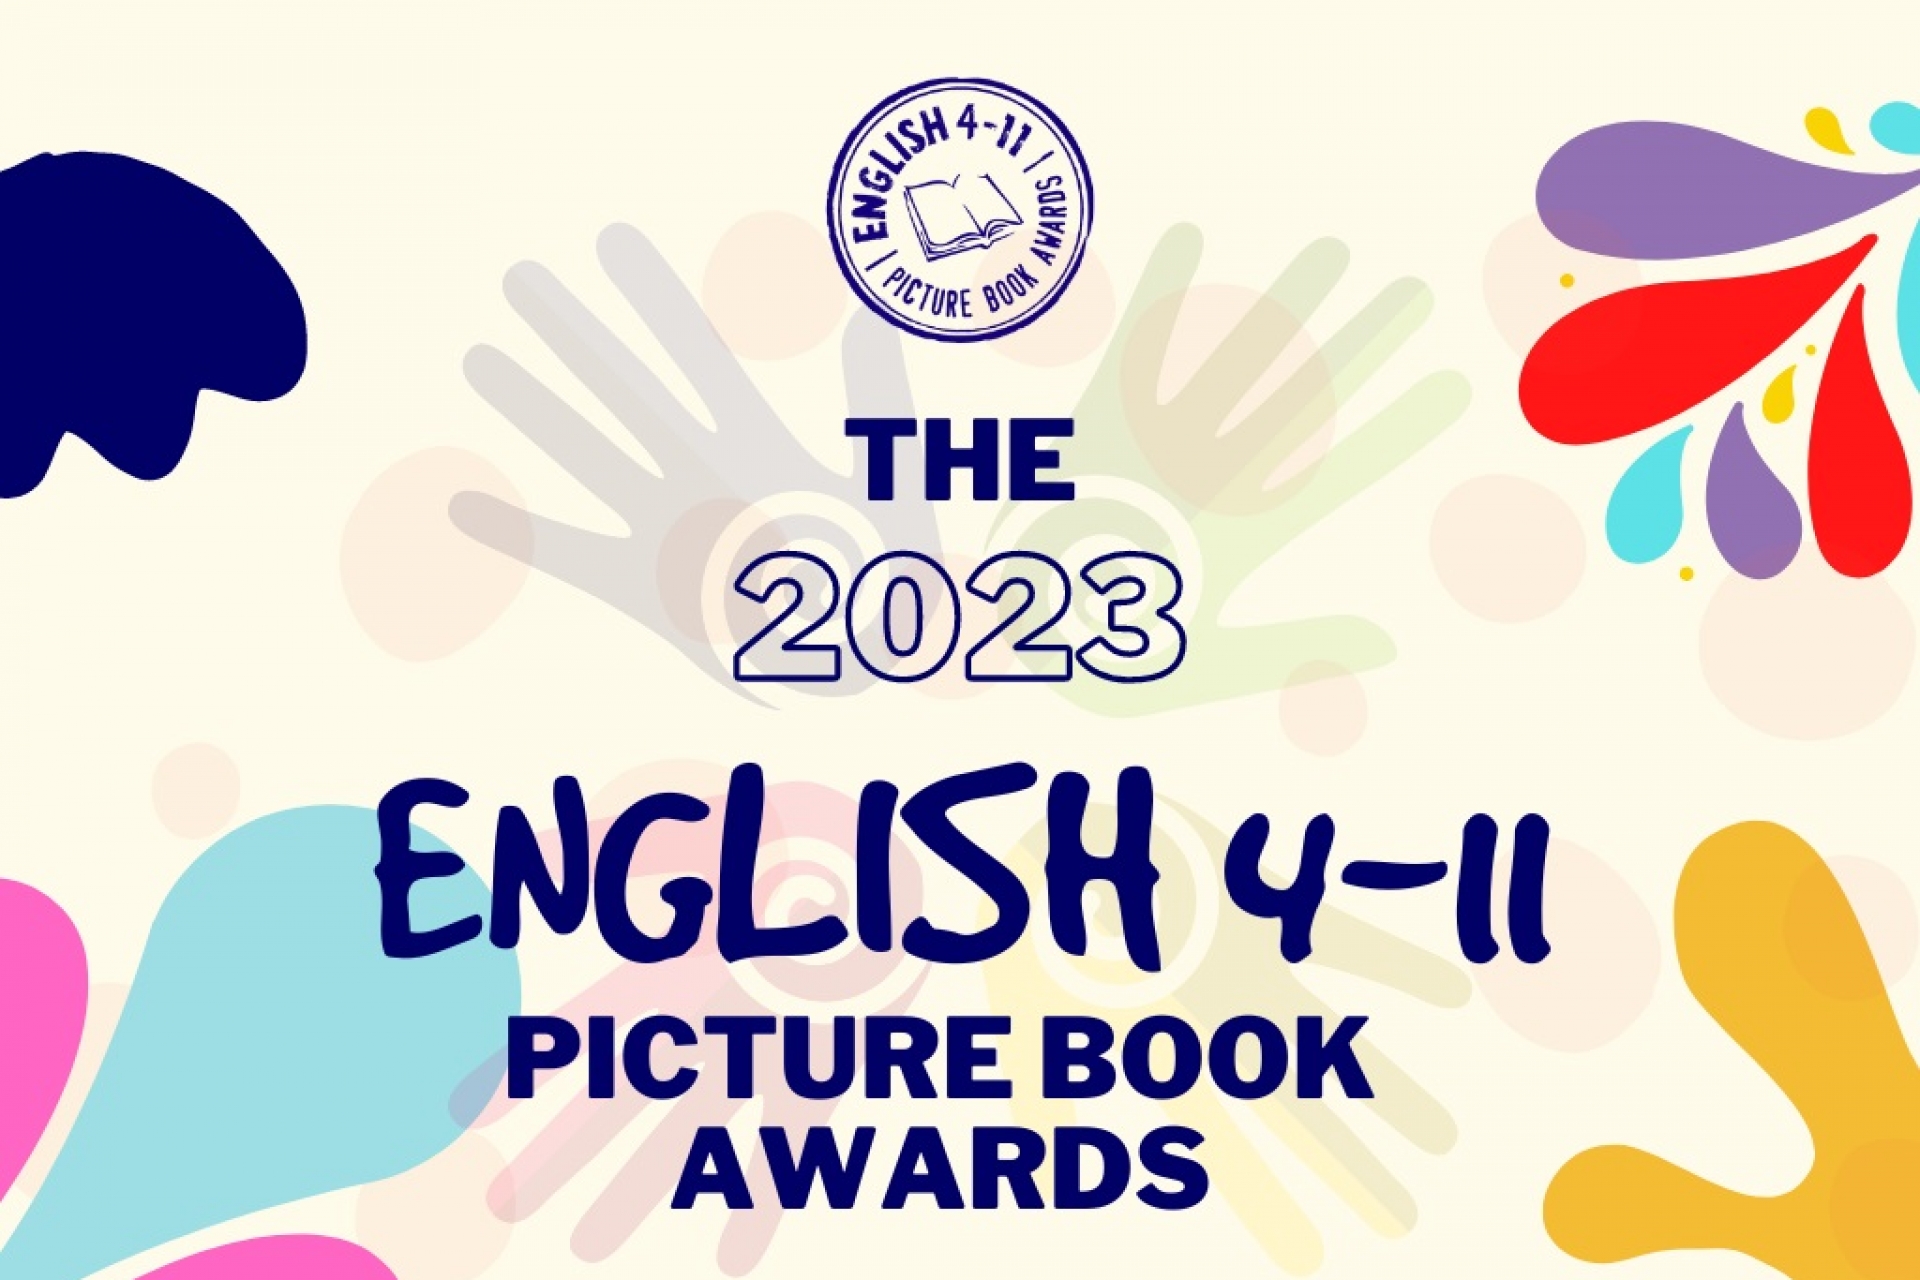 Announcing the Shortlist for the 2023 English 4-11 Picture Book Awards